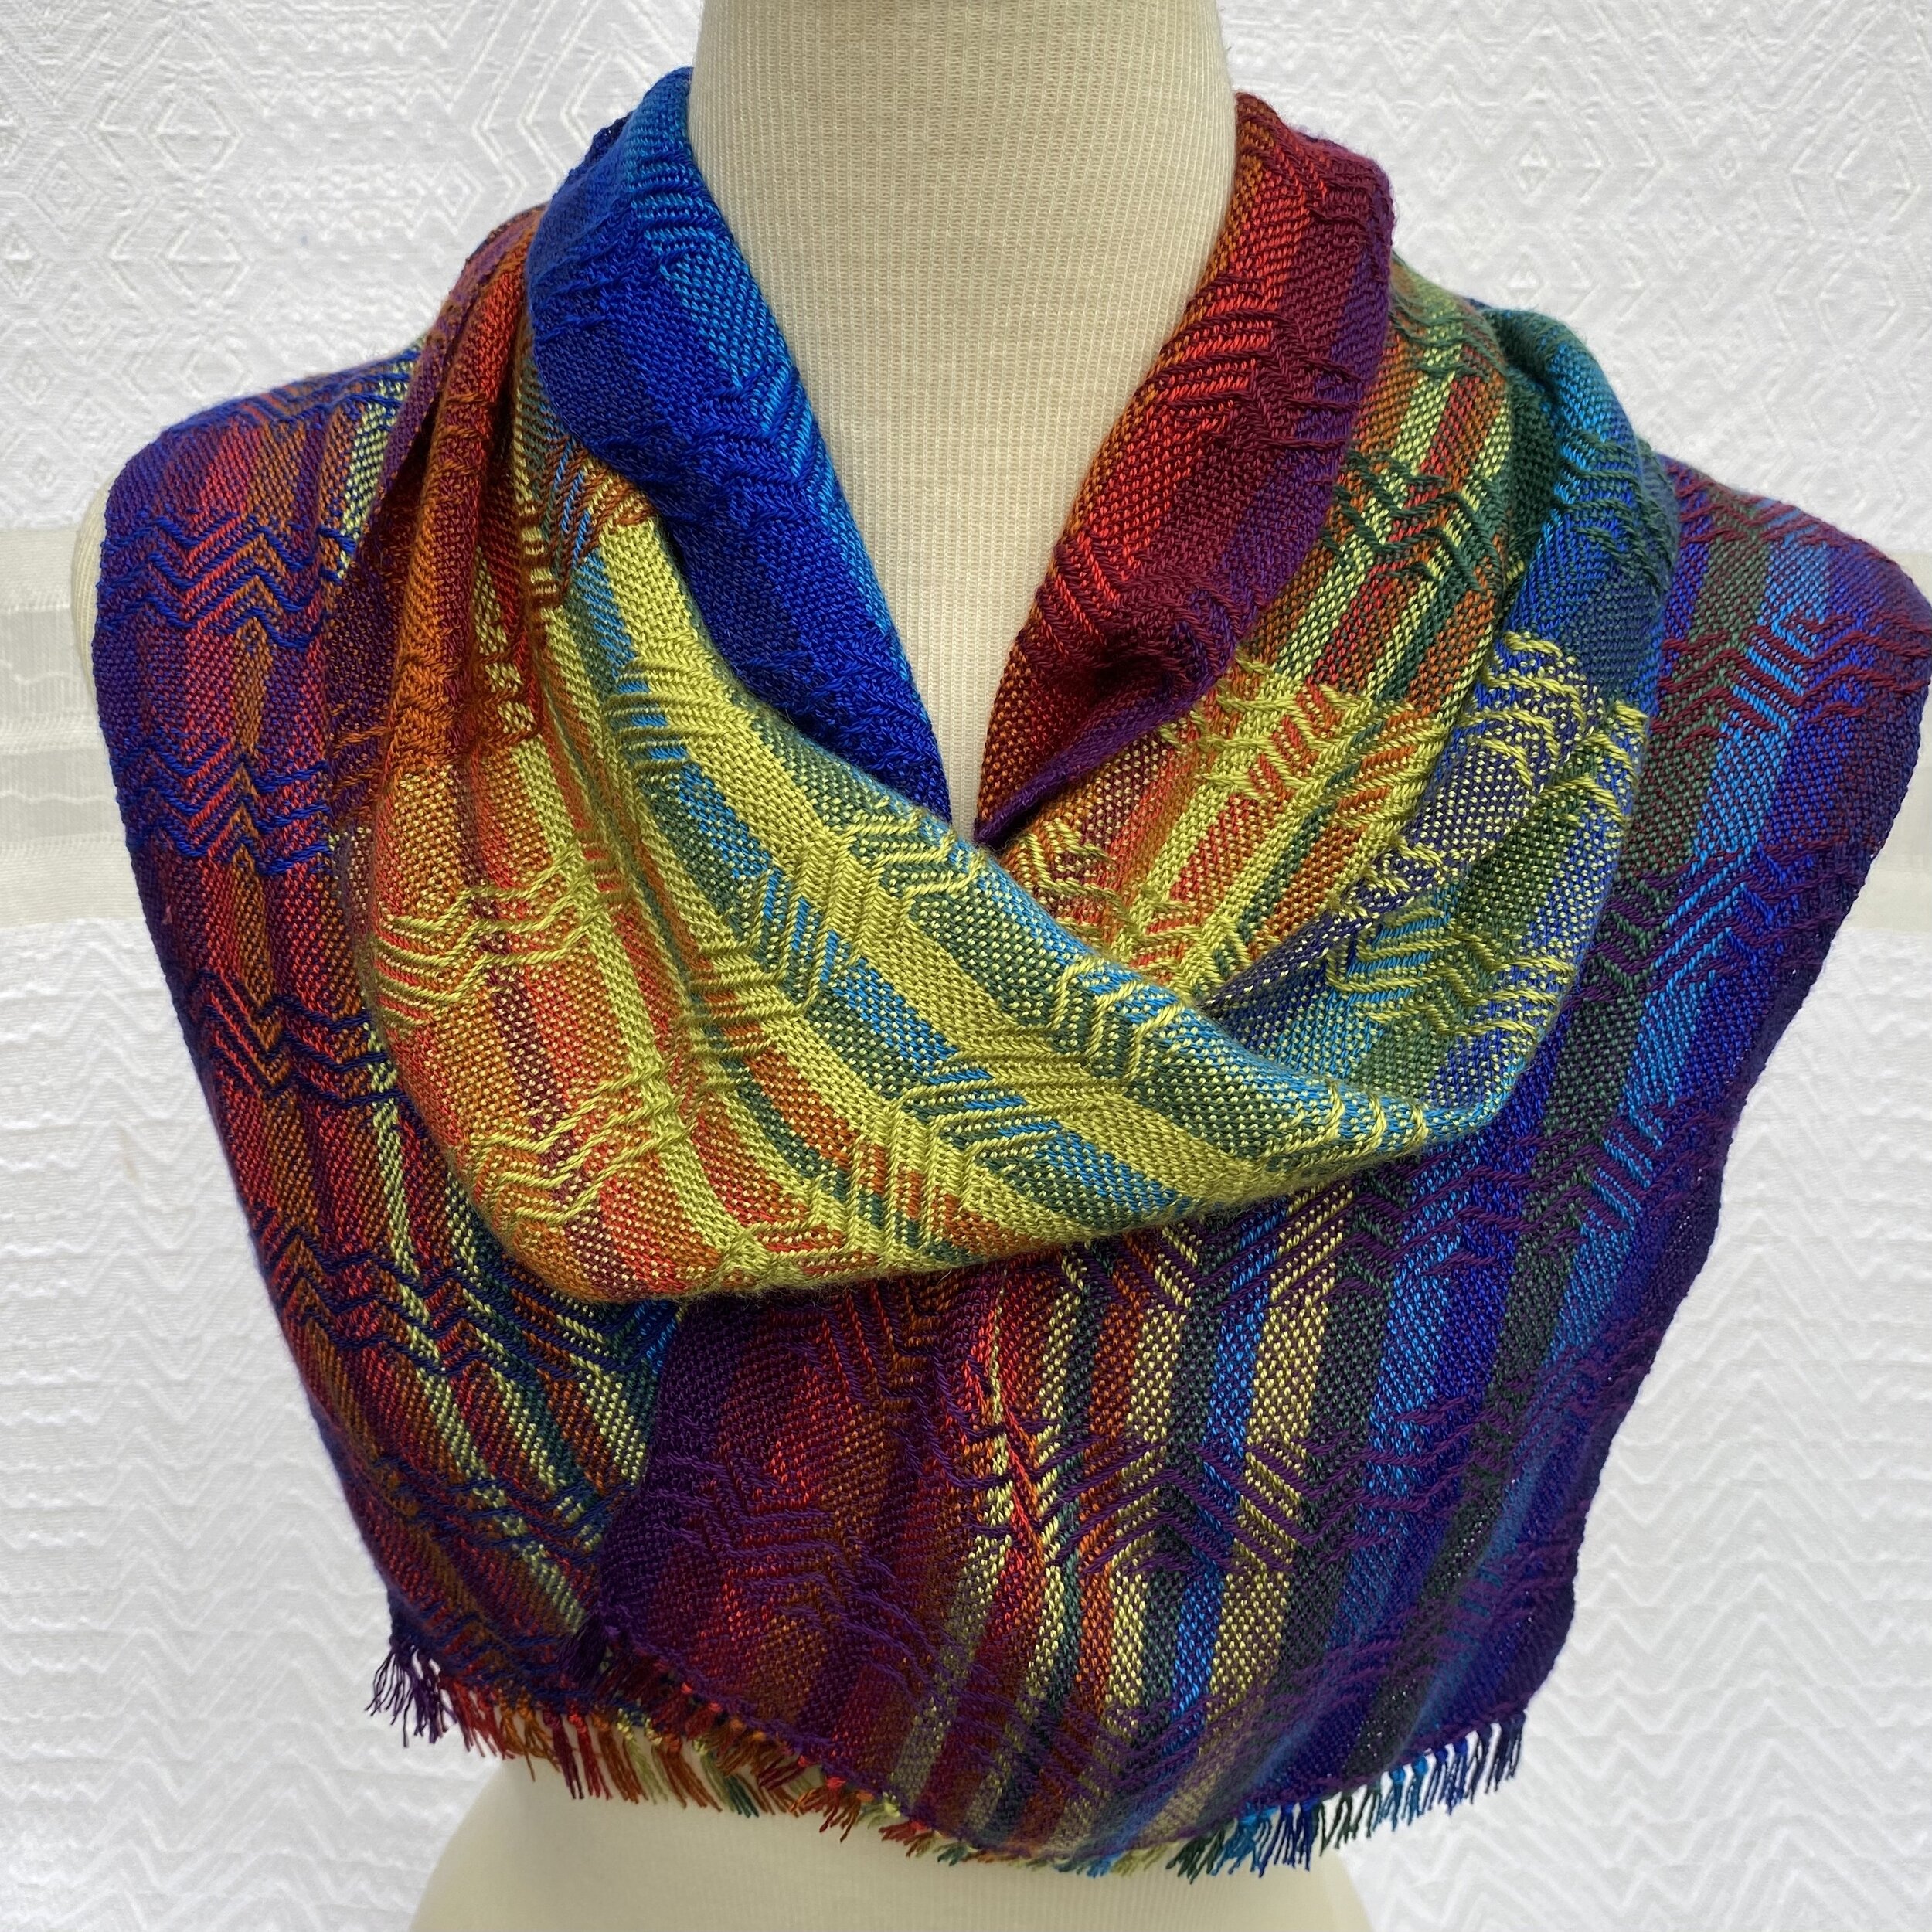  Red, Orange, Green, Blue and Purple Plain and Twill Handwoven Scarf       